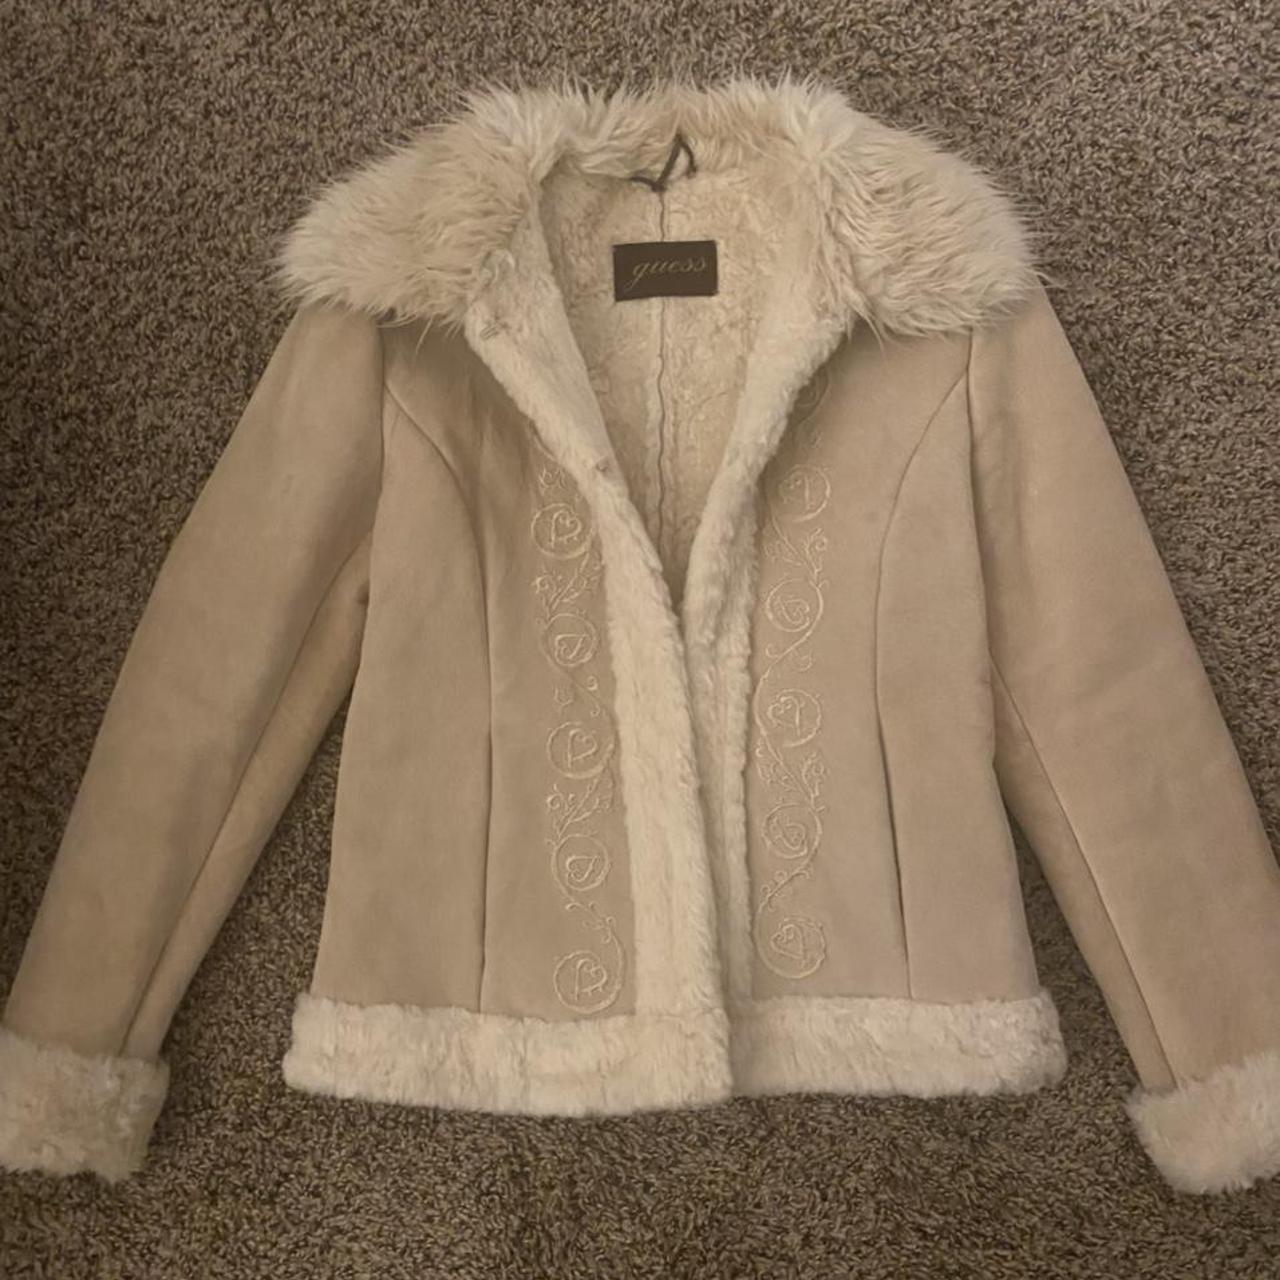 AMAZING guess early 2000s pennylane/afghan coat! The... - Depop